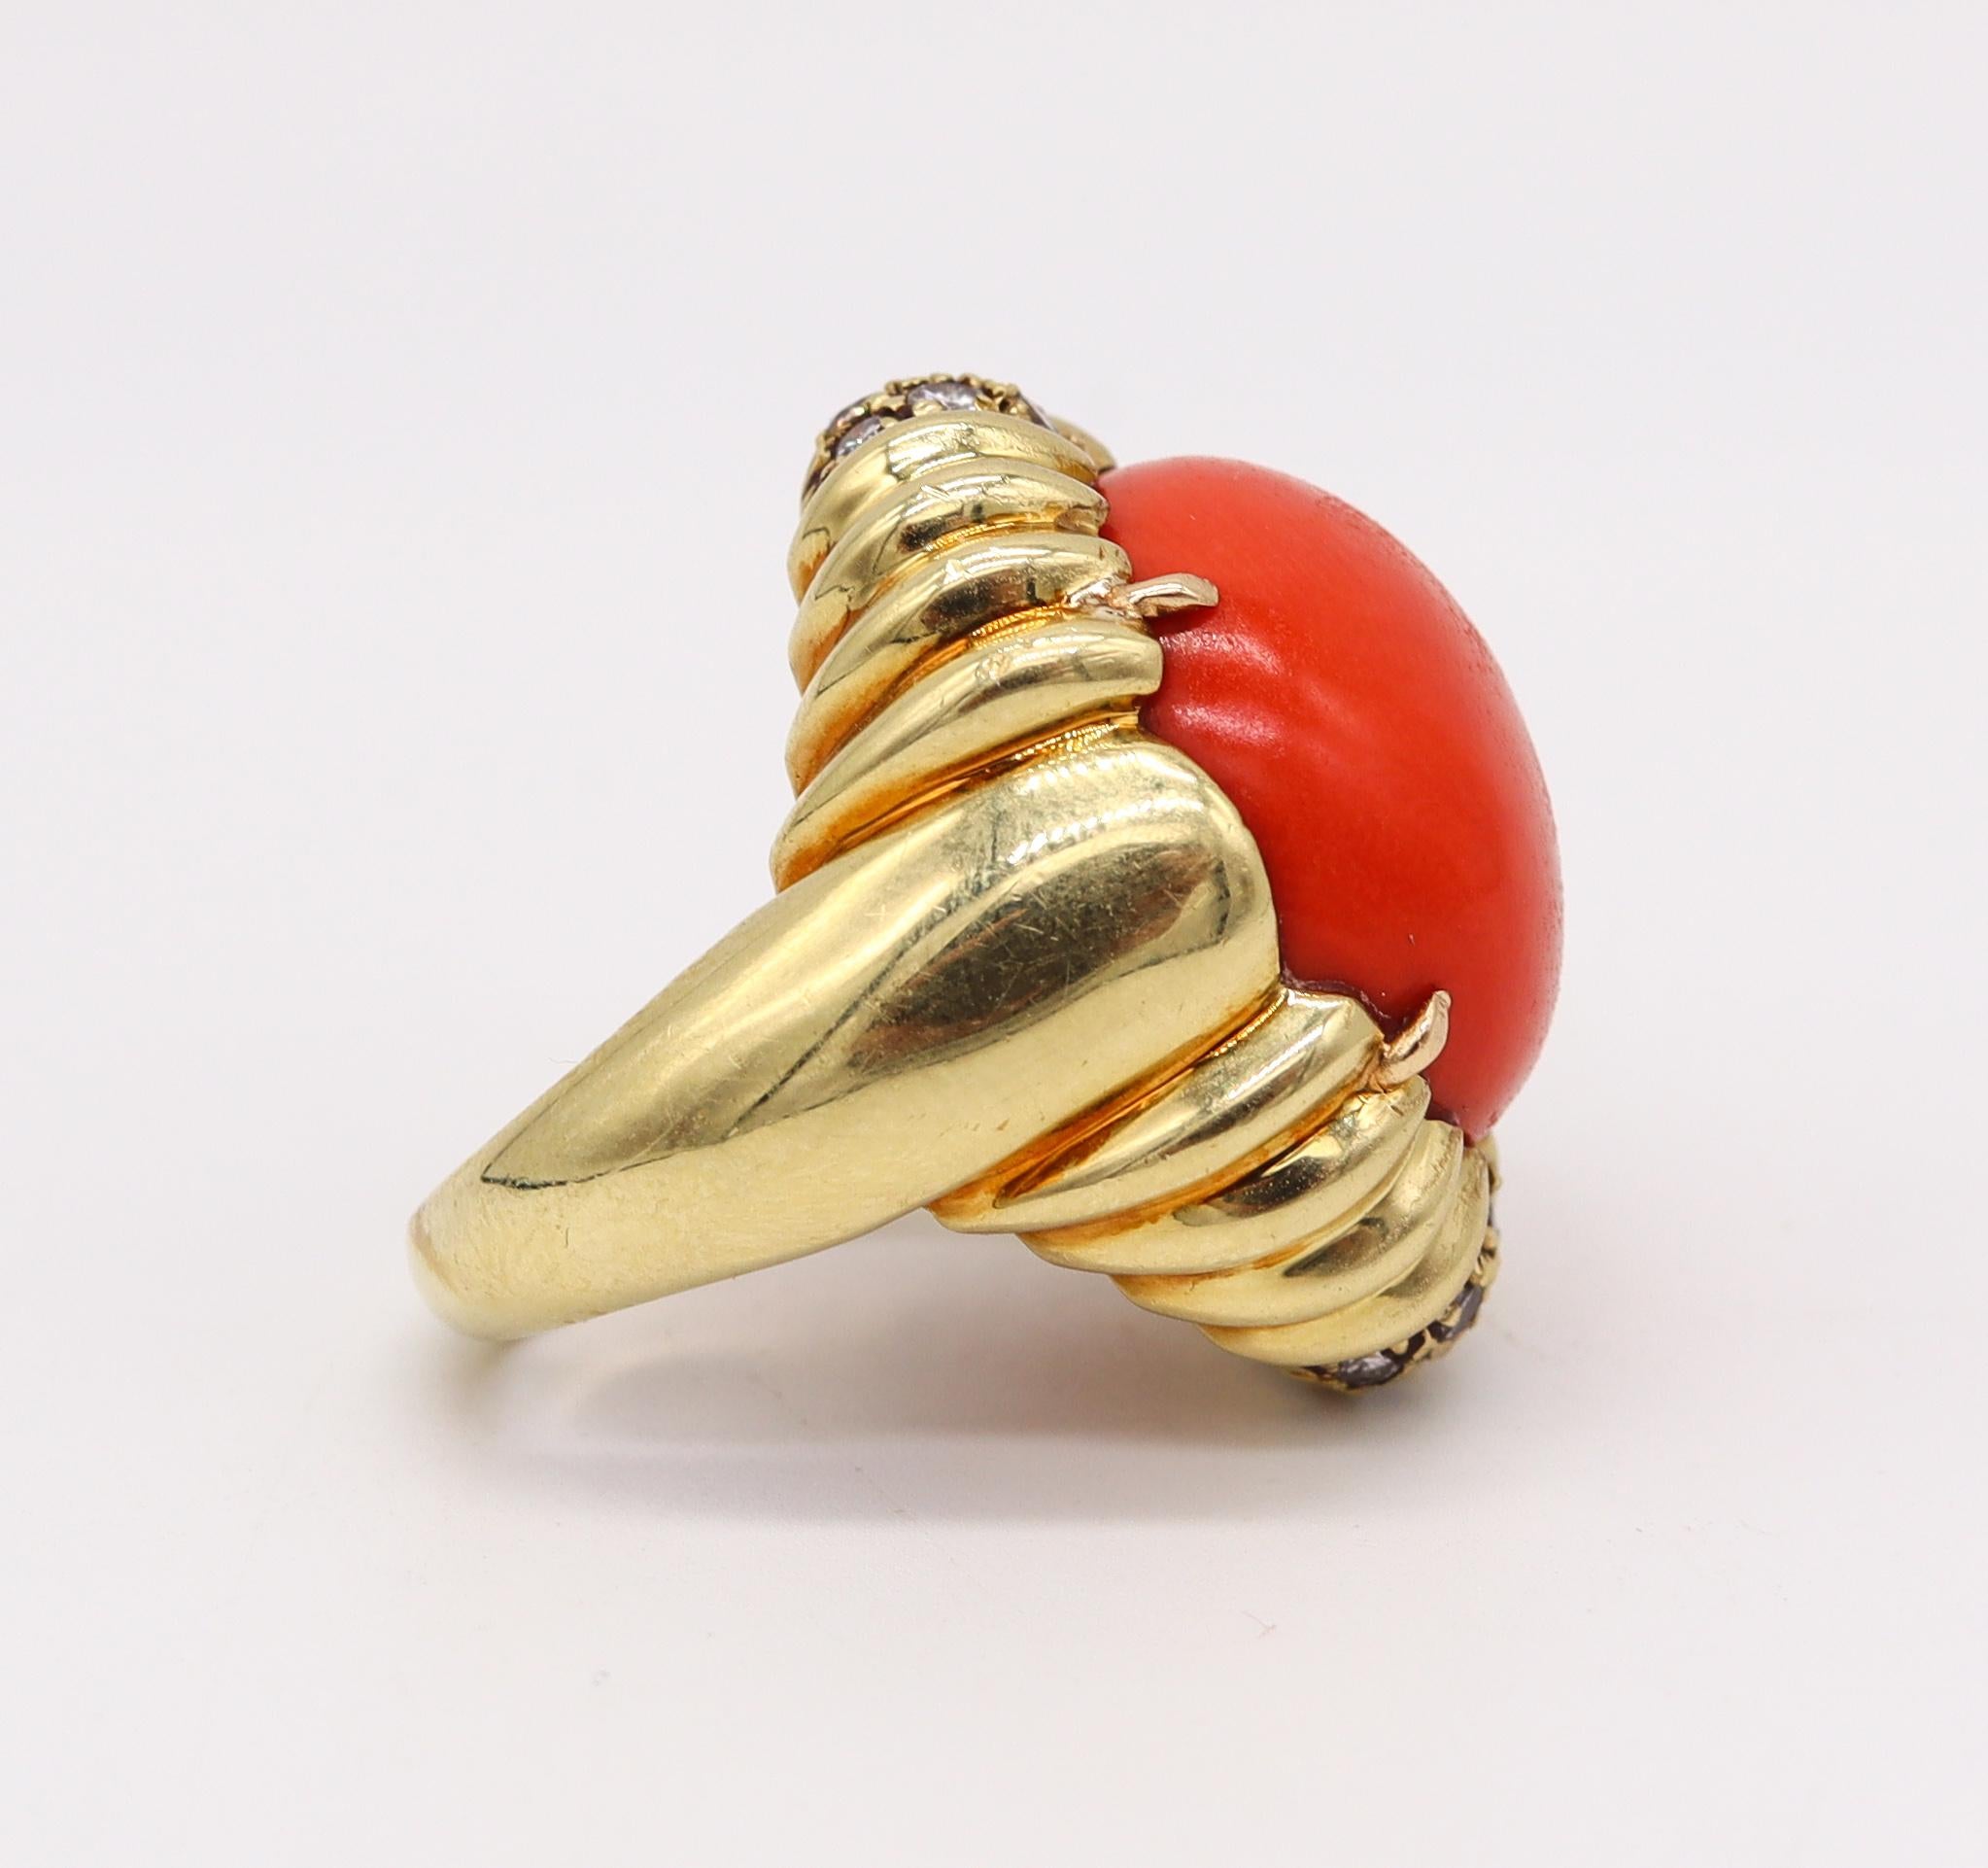 Women's Modernist 1970 Cocktail Ring in 18Kt Yellow Gold 26.89 Cts Red Coral & Diamonds For Sale